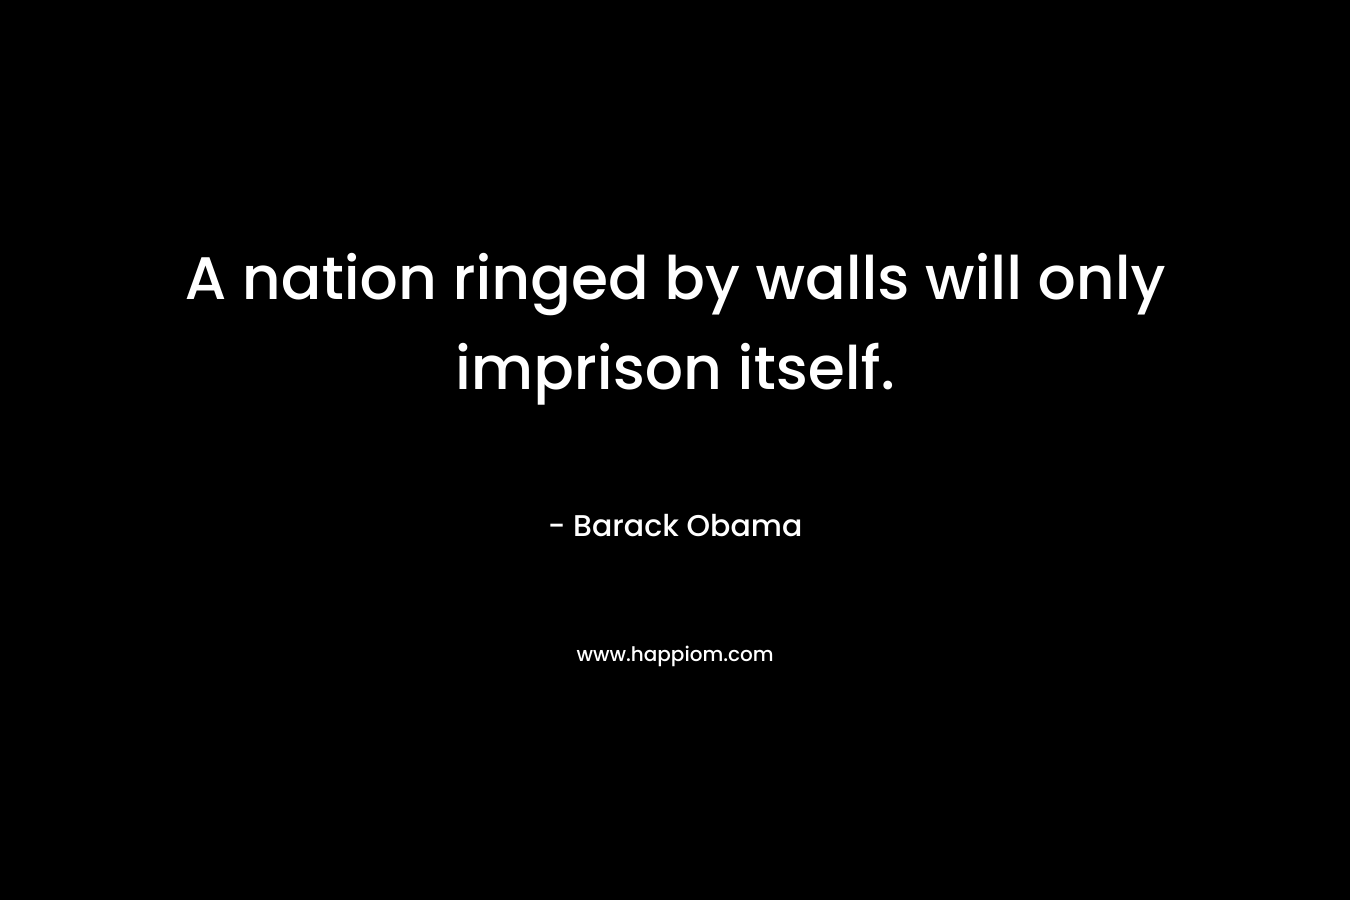 A nation ringed by walls will only imprison itself. – Barack Obama